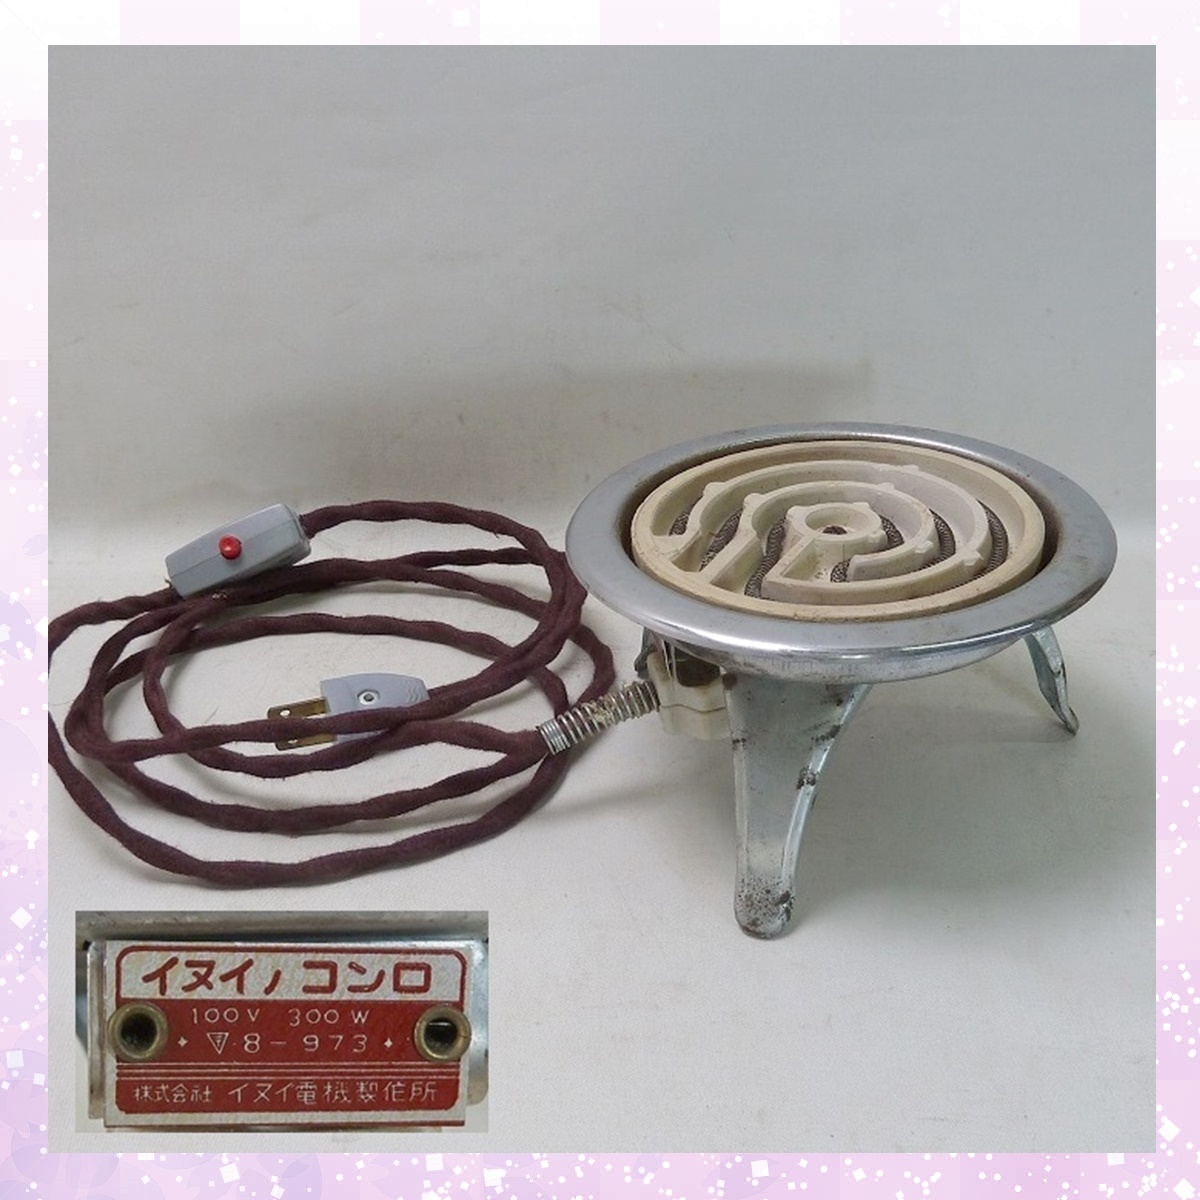 @ electric heating vessel dog i electro- machine factory 3. pair dog ino portable cooking stove electrification OK tea utensils Showa Retro antique consumer electronics product hot water ...